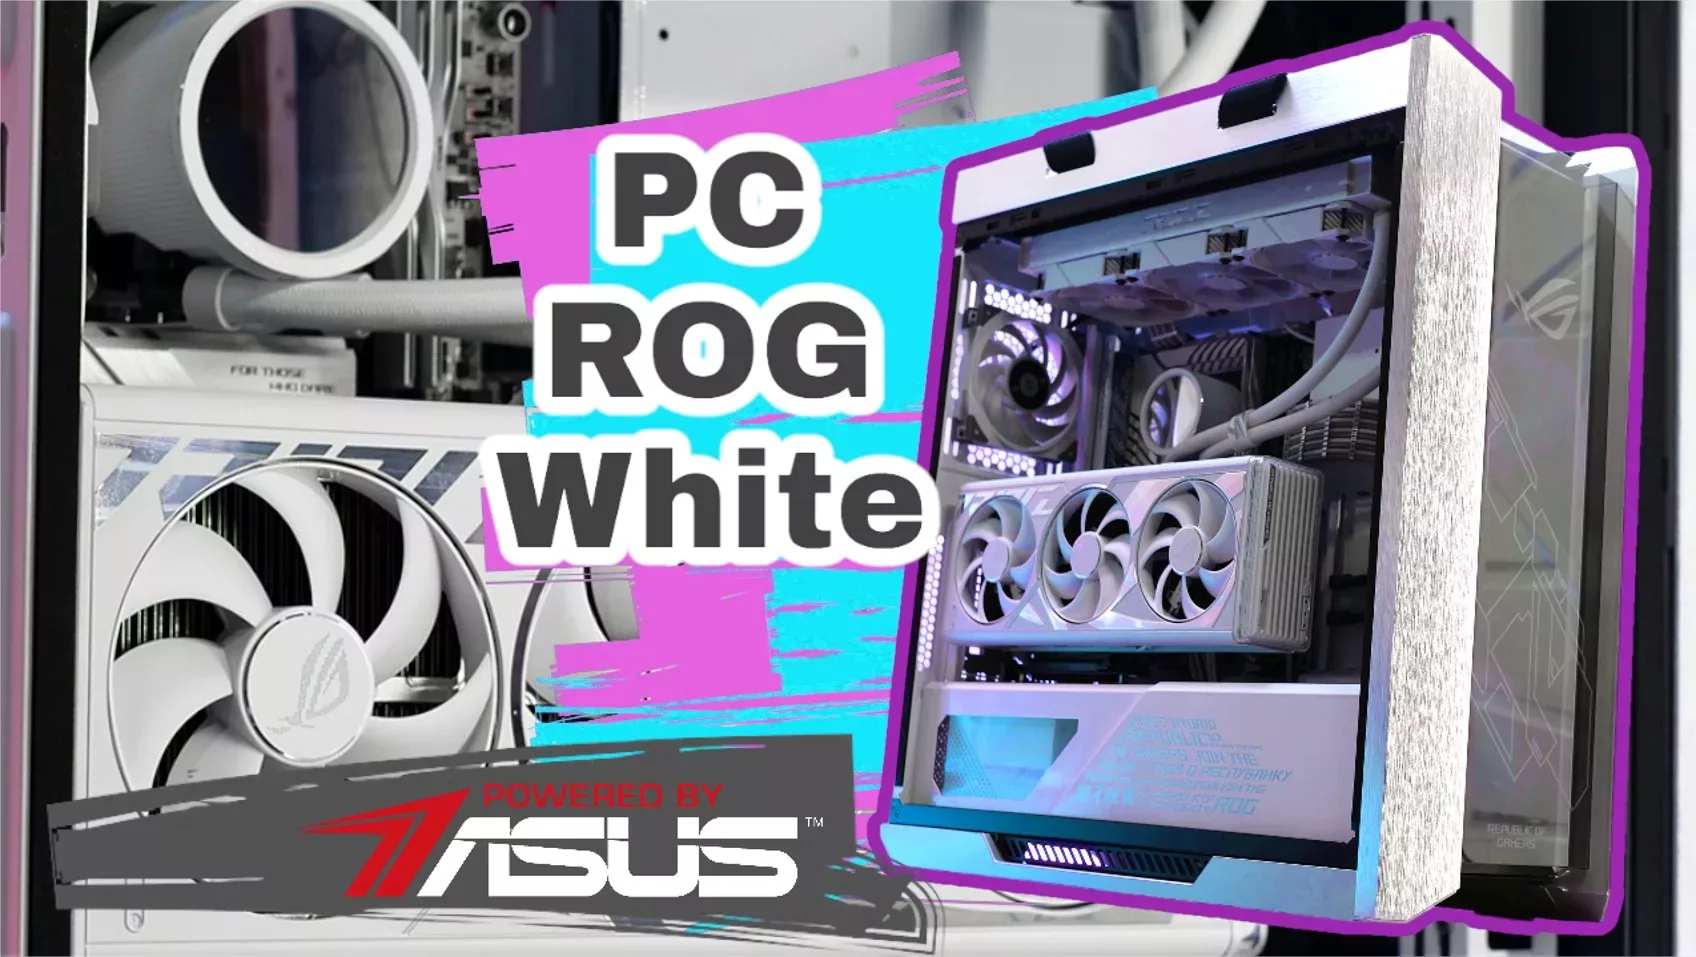 Build] PC GAMER ROG White Powered By ASUS - Pause Hardware